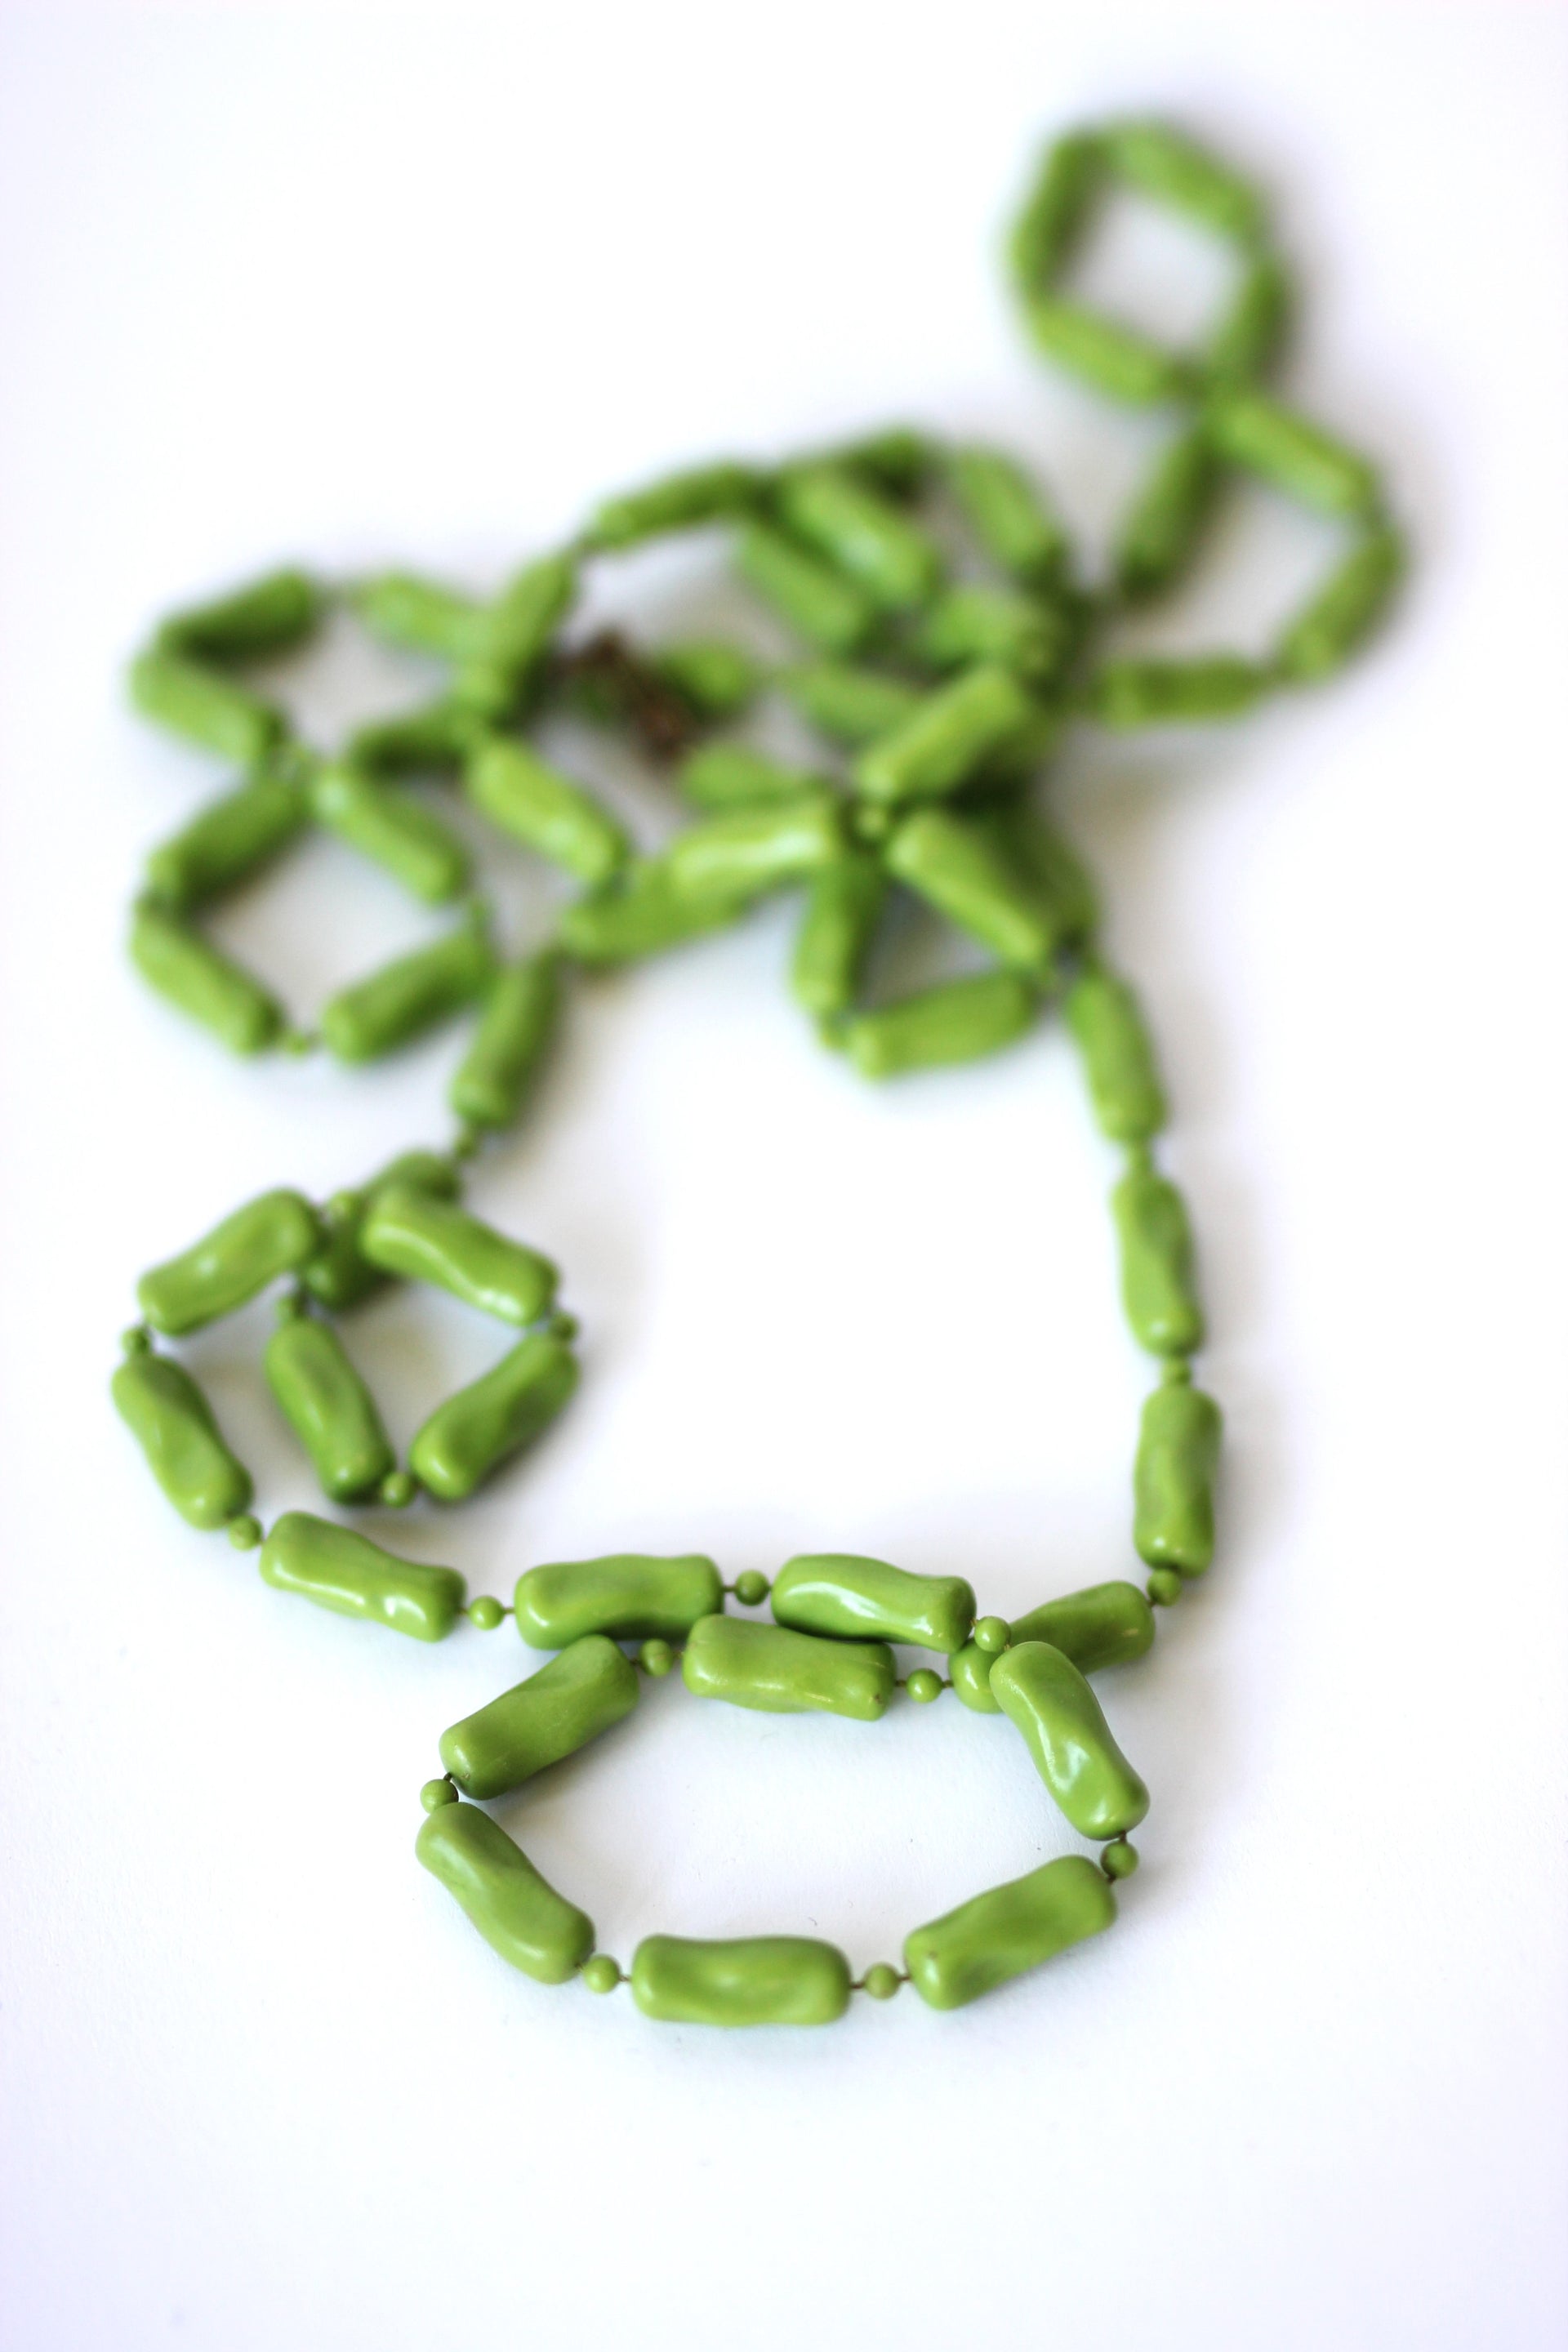 Long Bright Green Necklace.